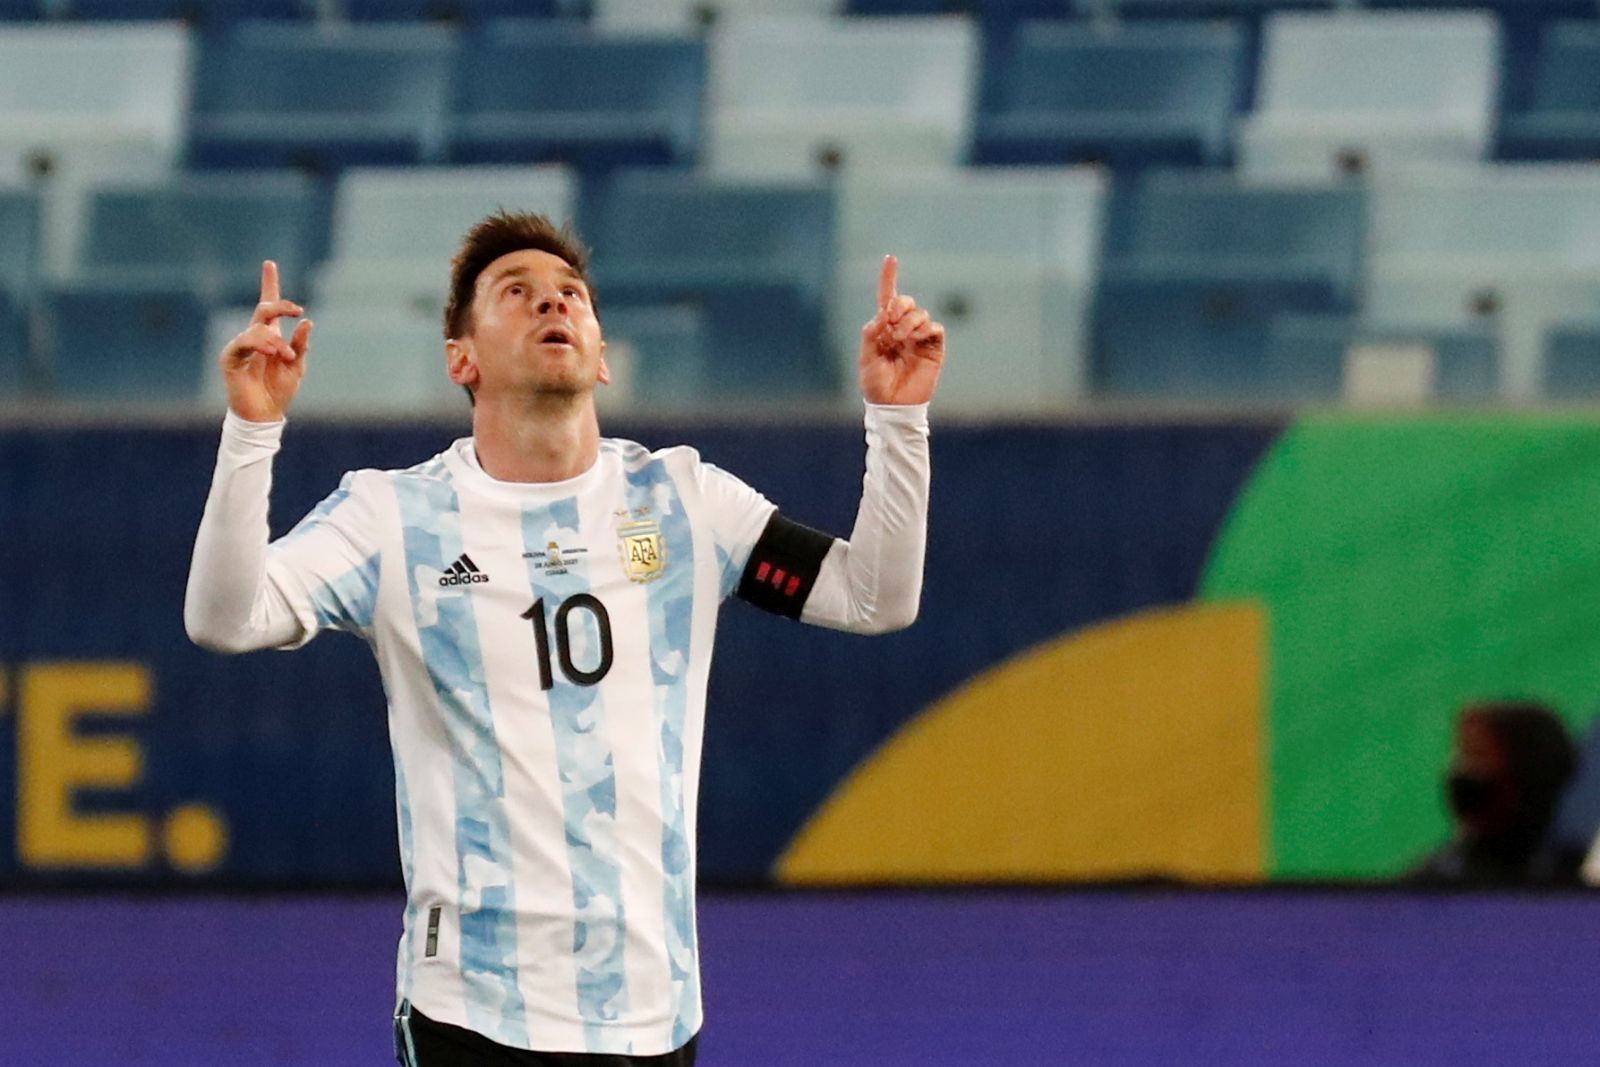 epa09309895 Lionel Messi of Argentina reacts after scoring during the Copa America group A soccer match between Bolivia and Argentina at Arena Pantanal stadium in Cuiaba, Brazil, 28 June 2021.  EPA/Sebastiao Moreira